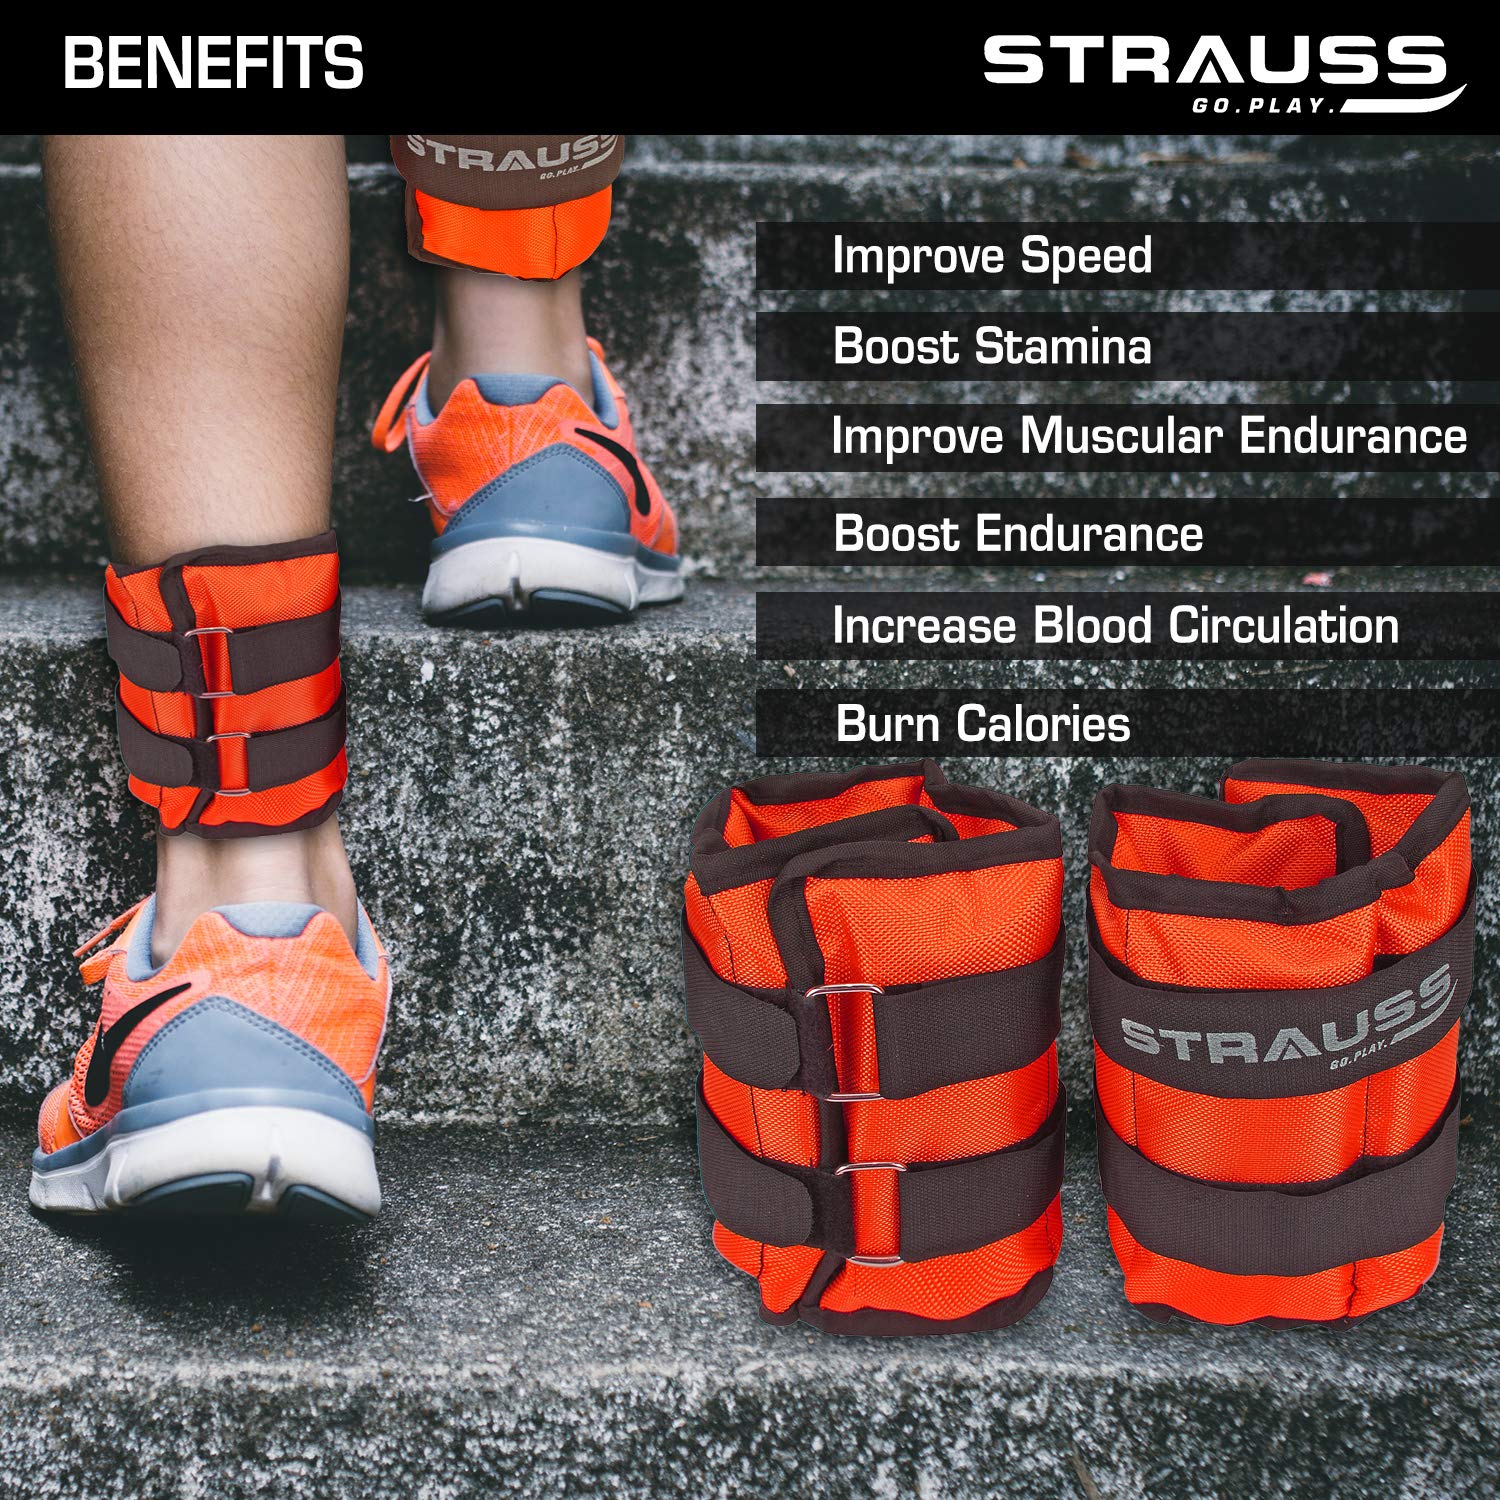 Strauss Adjustable Ankle/Wrist Weights 1.5 KG X 2 | Ideal for Walking, Running, Jogging, Cycling, Gym, Workout & Strength Training | Easy to Use on Ankle, Wrist, Leg, (Orange)